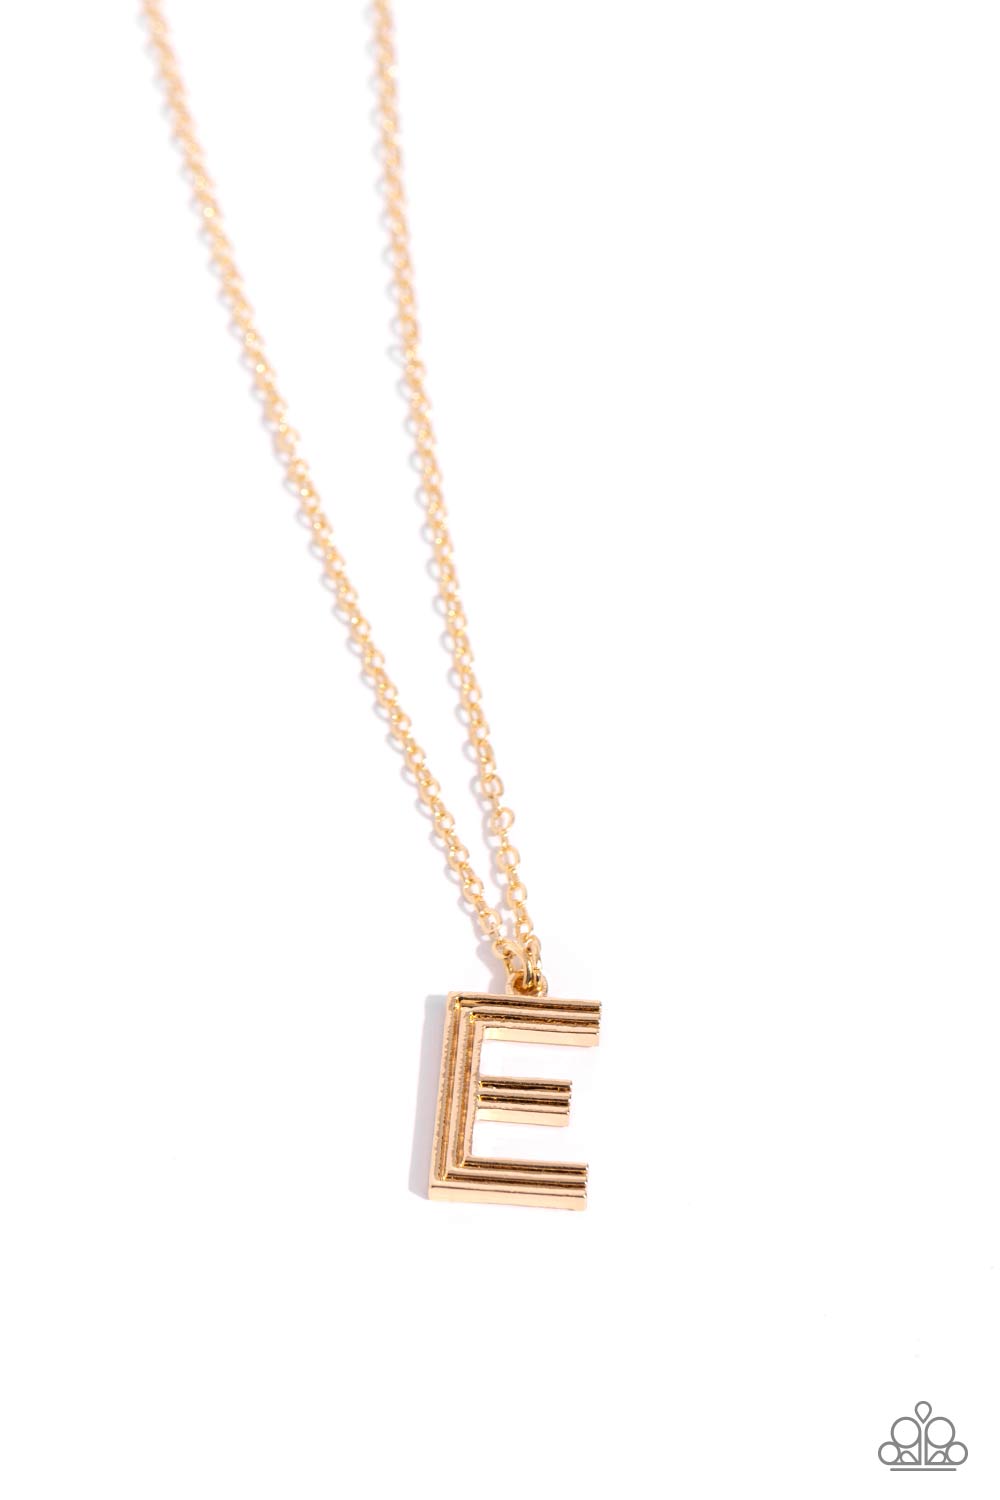 Leave Your Initials - gold - E - Paparazzi necklace